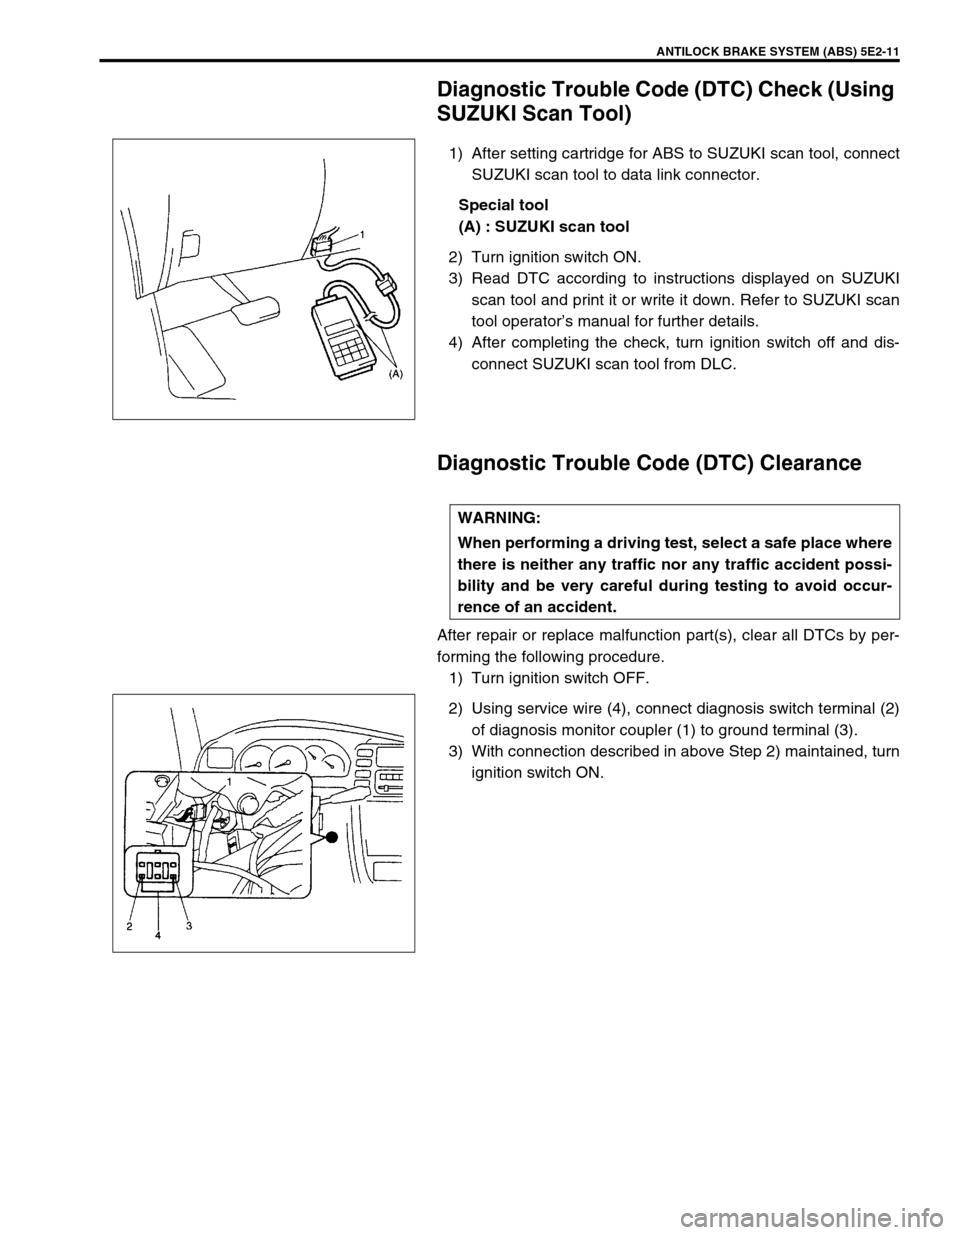 SUZUKI GRAND VITARA 1999 2.G Owners Manual ANTILOCK BRAKE SYSTEM (ABS) 5E2-11
Diagnostic Trouble Code (DTC) Check (Using 
SUZUKI Scan Tool)
1) After setting cartridge for ABS to SUZUKI scan tool, connect
SUZUKI scan tool to data link connector